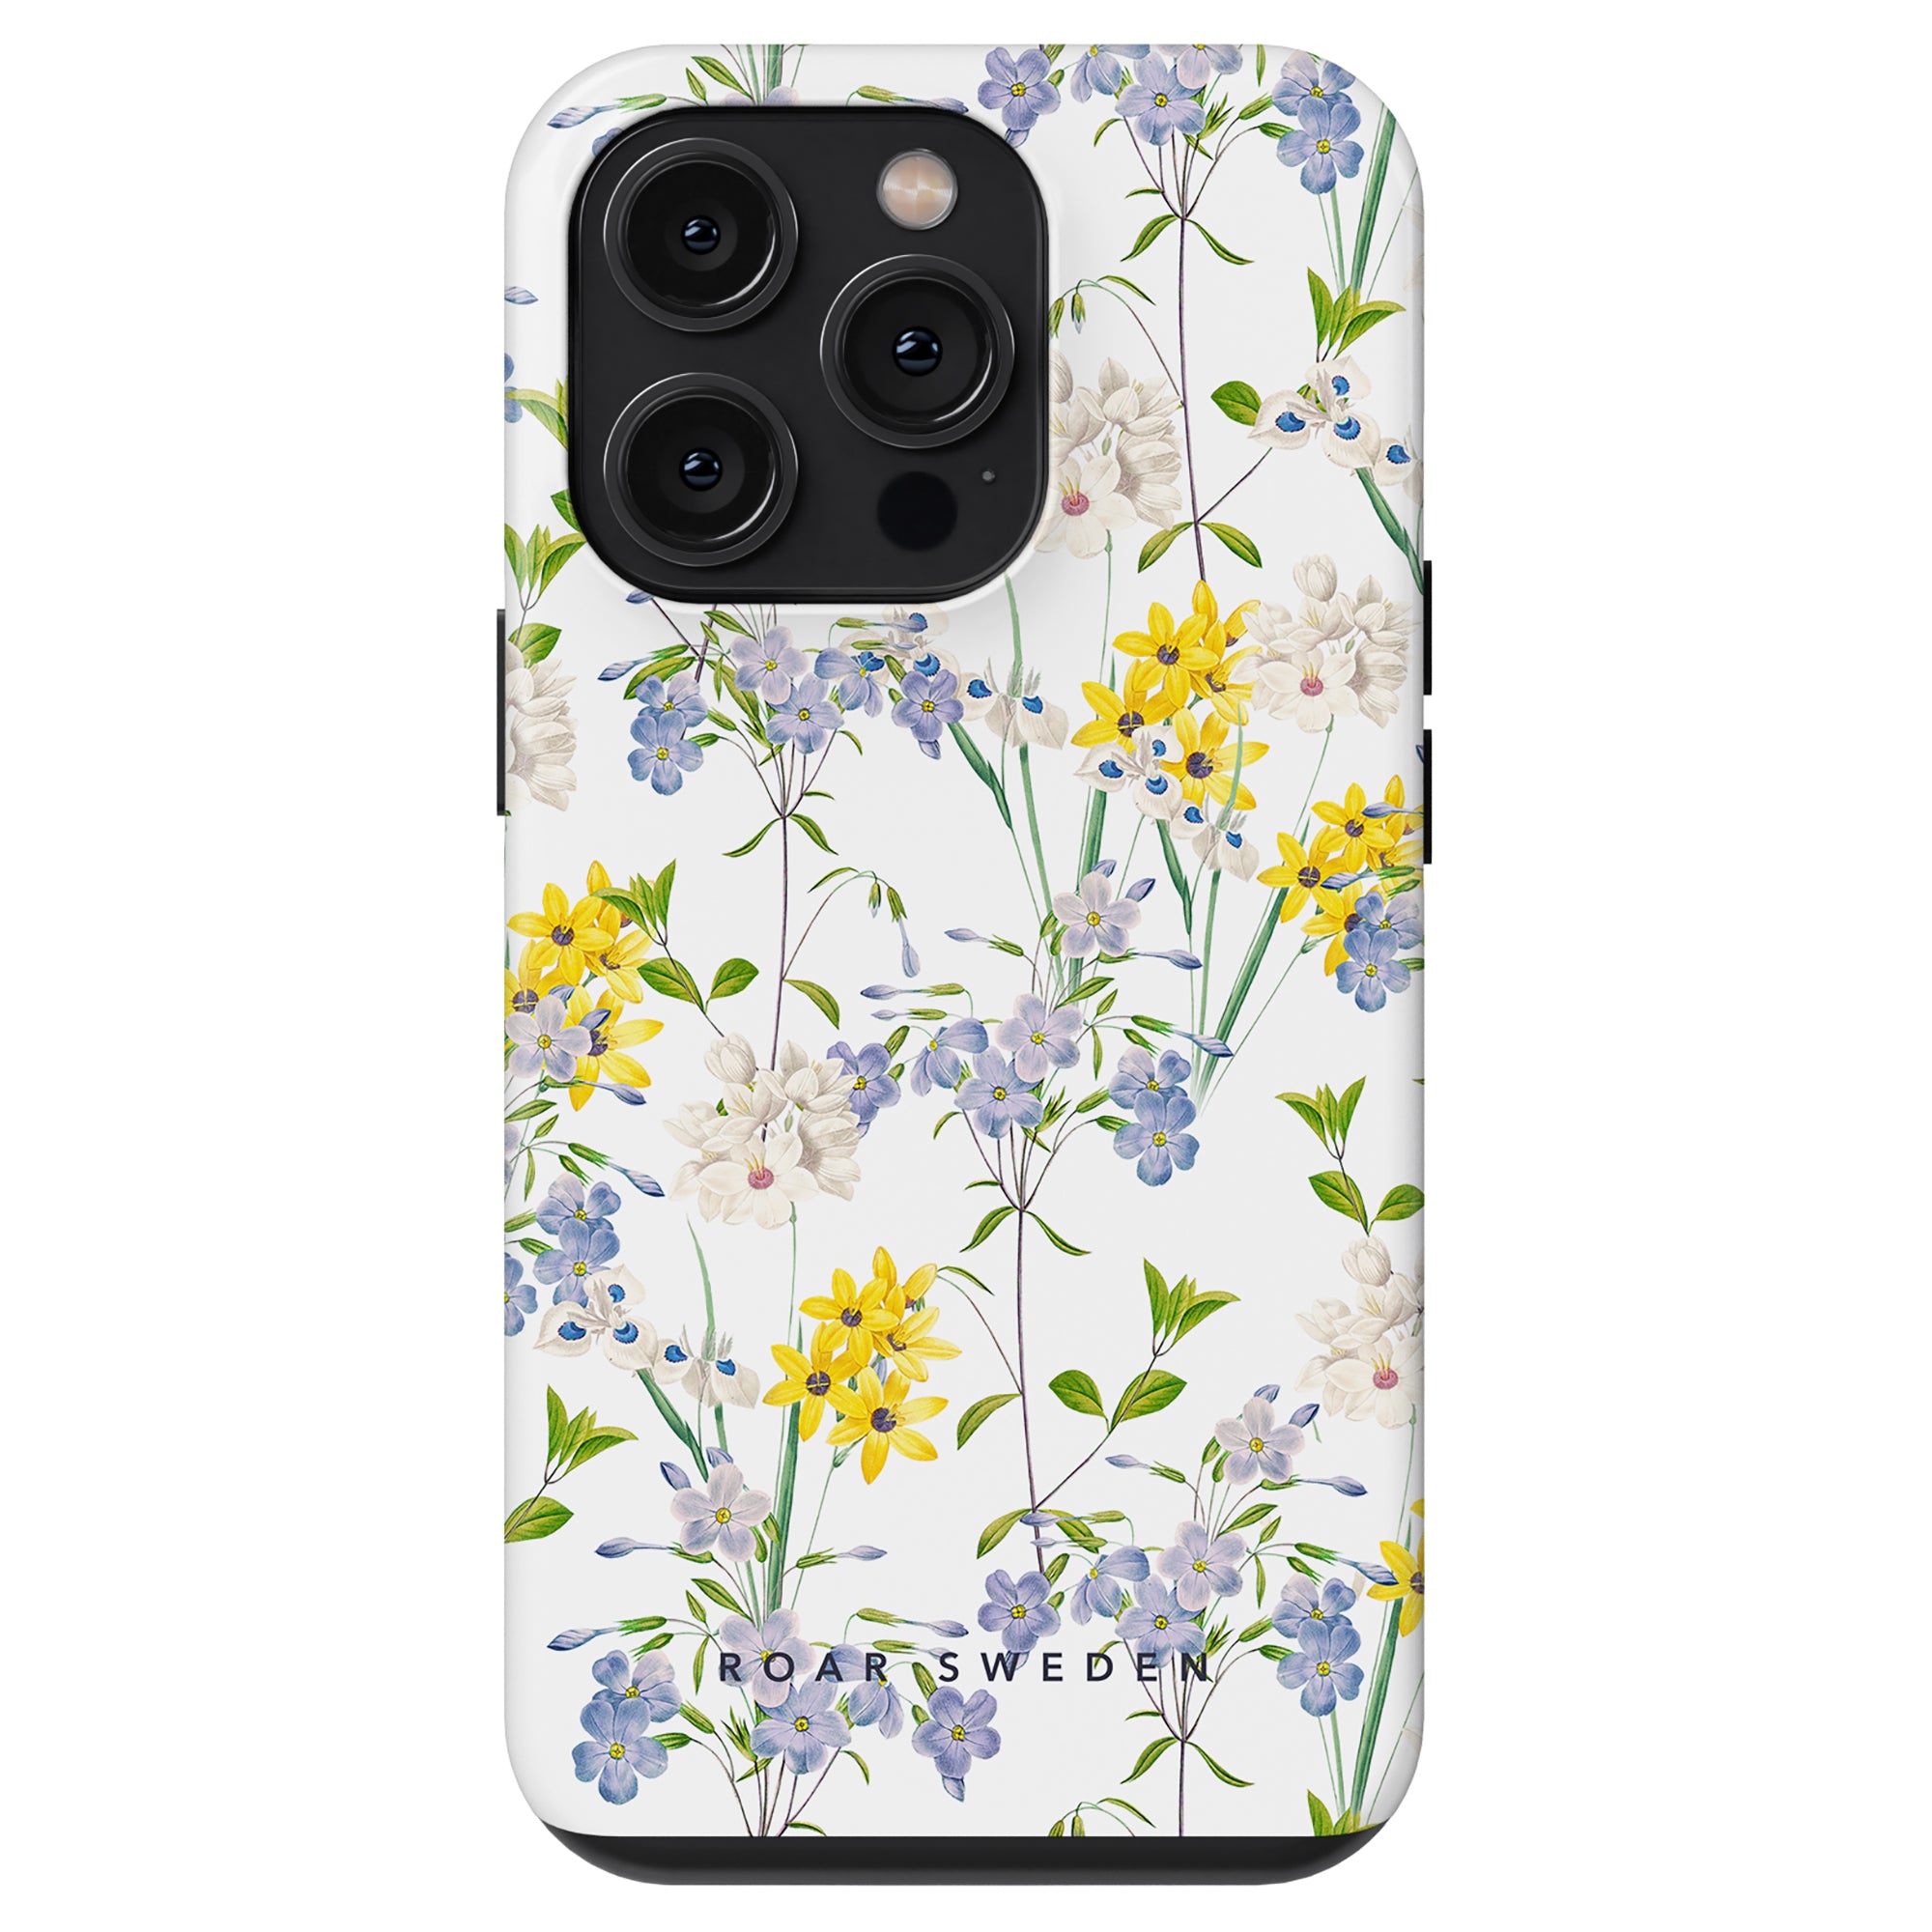 Summer Flowers phone case with camera cutouts for a smartphone, perfect for users with ergonomic design preferences.